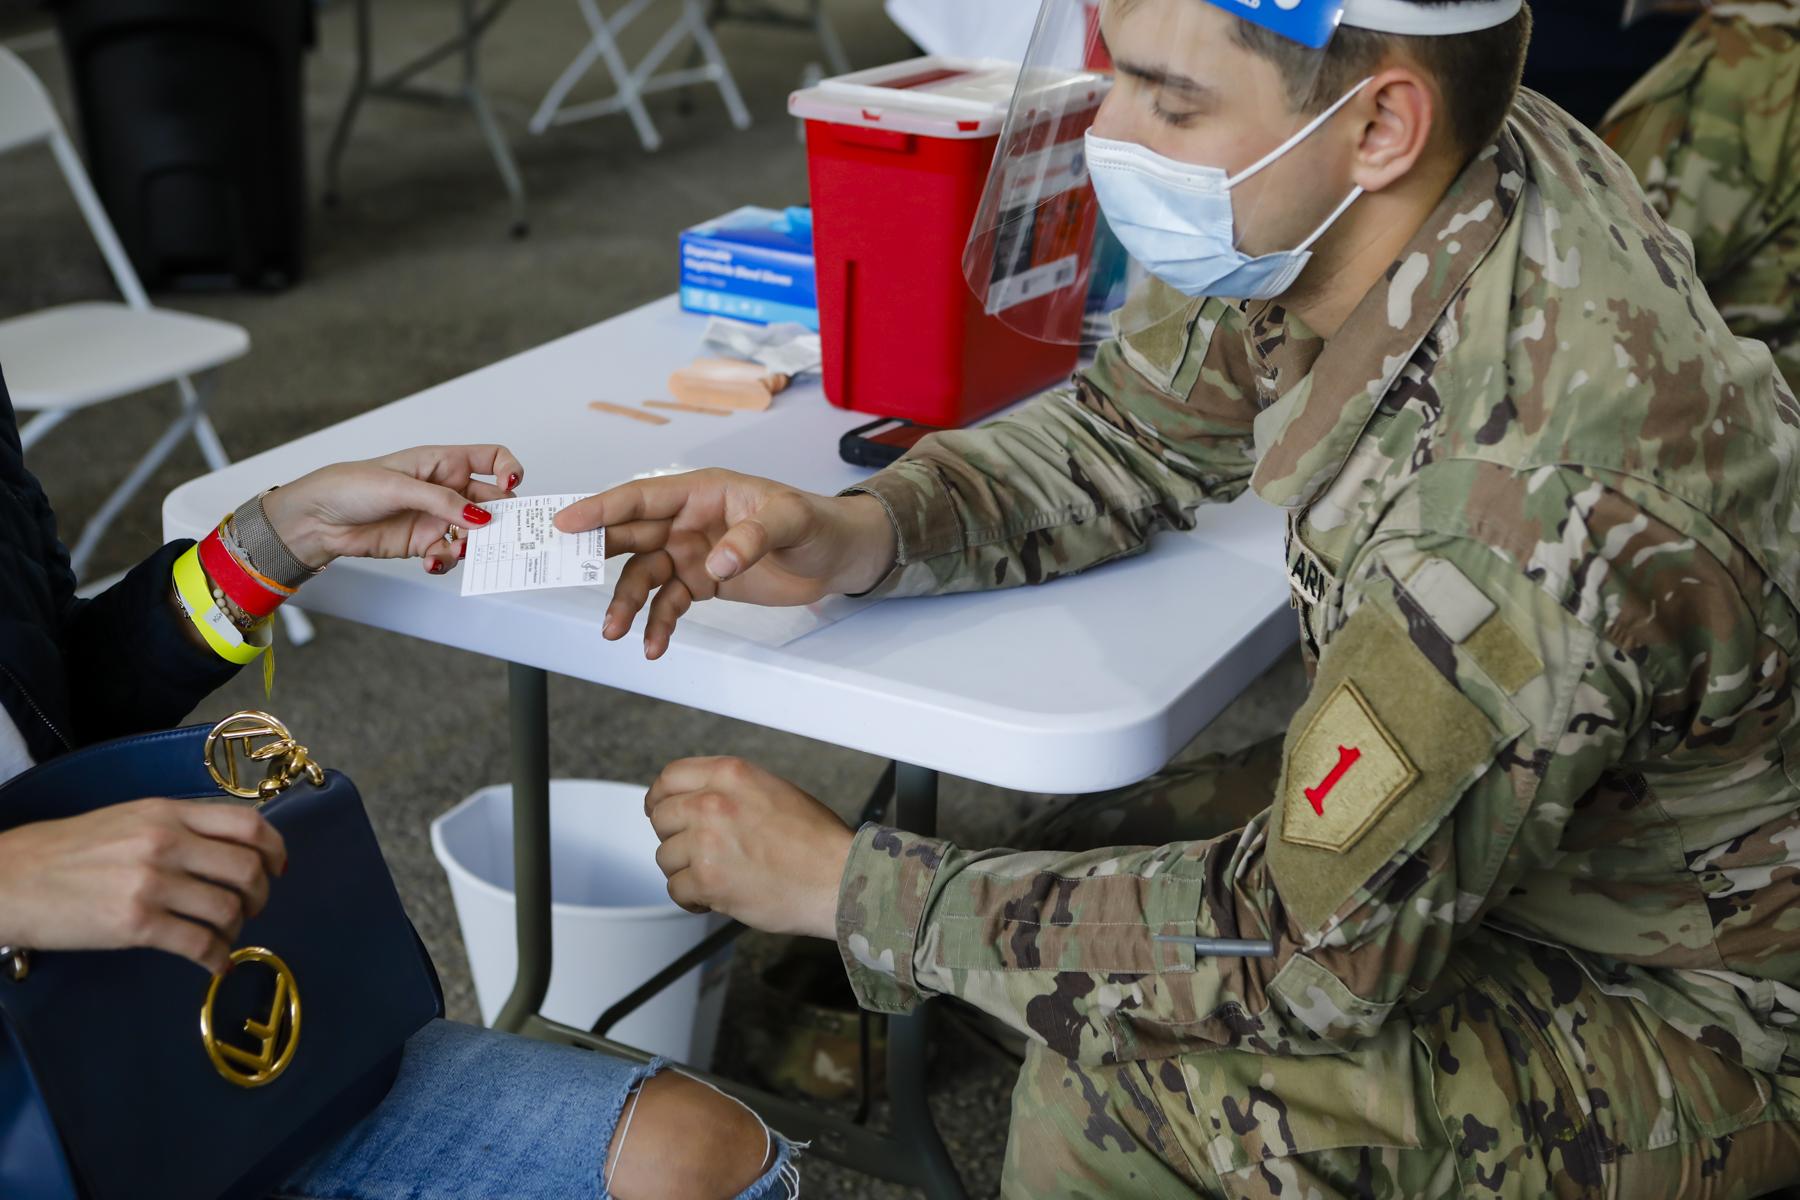 FEMA vaccination facility in North Miami - A U.S. Army soldier hands out a vaccine card in a...